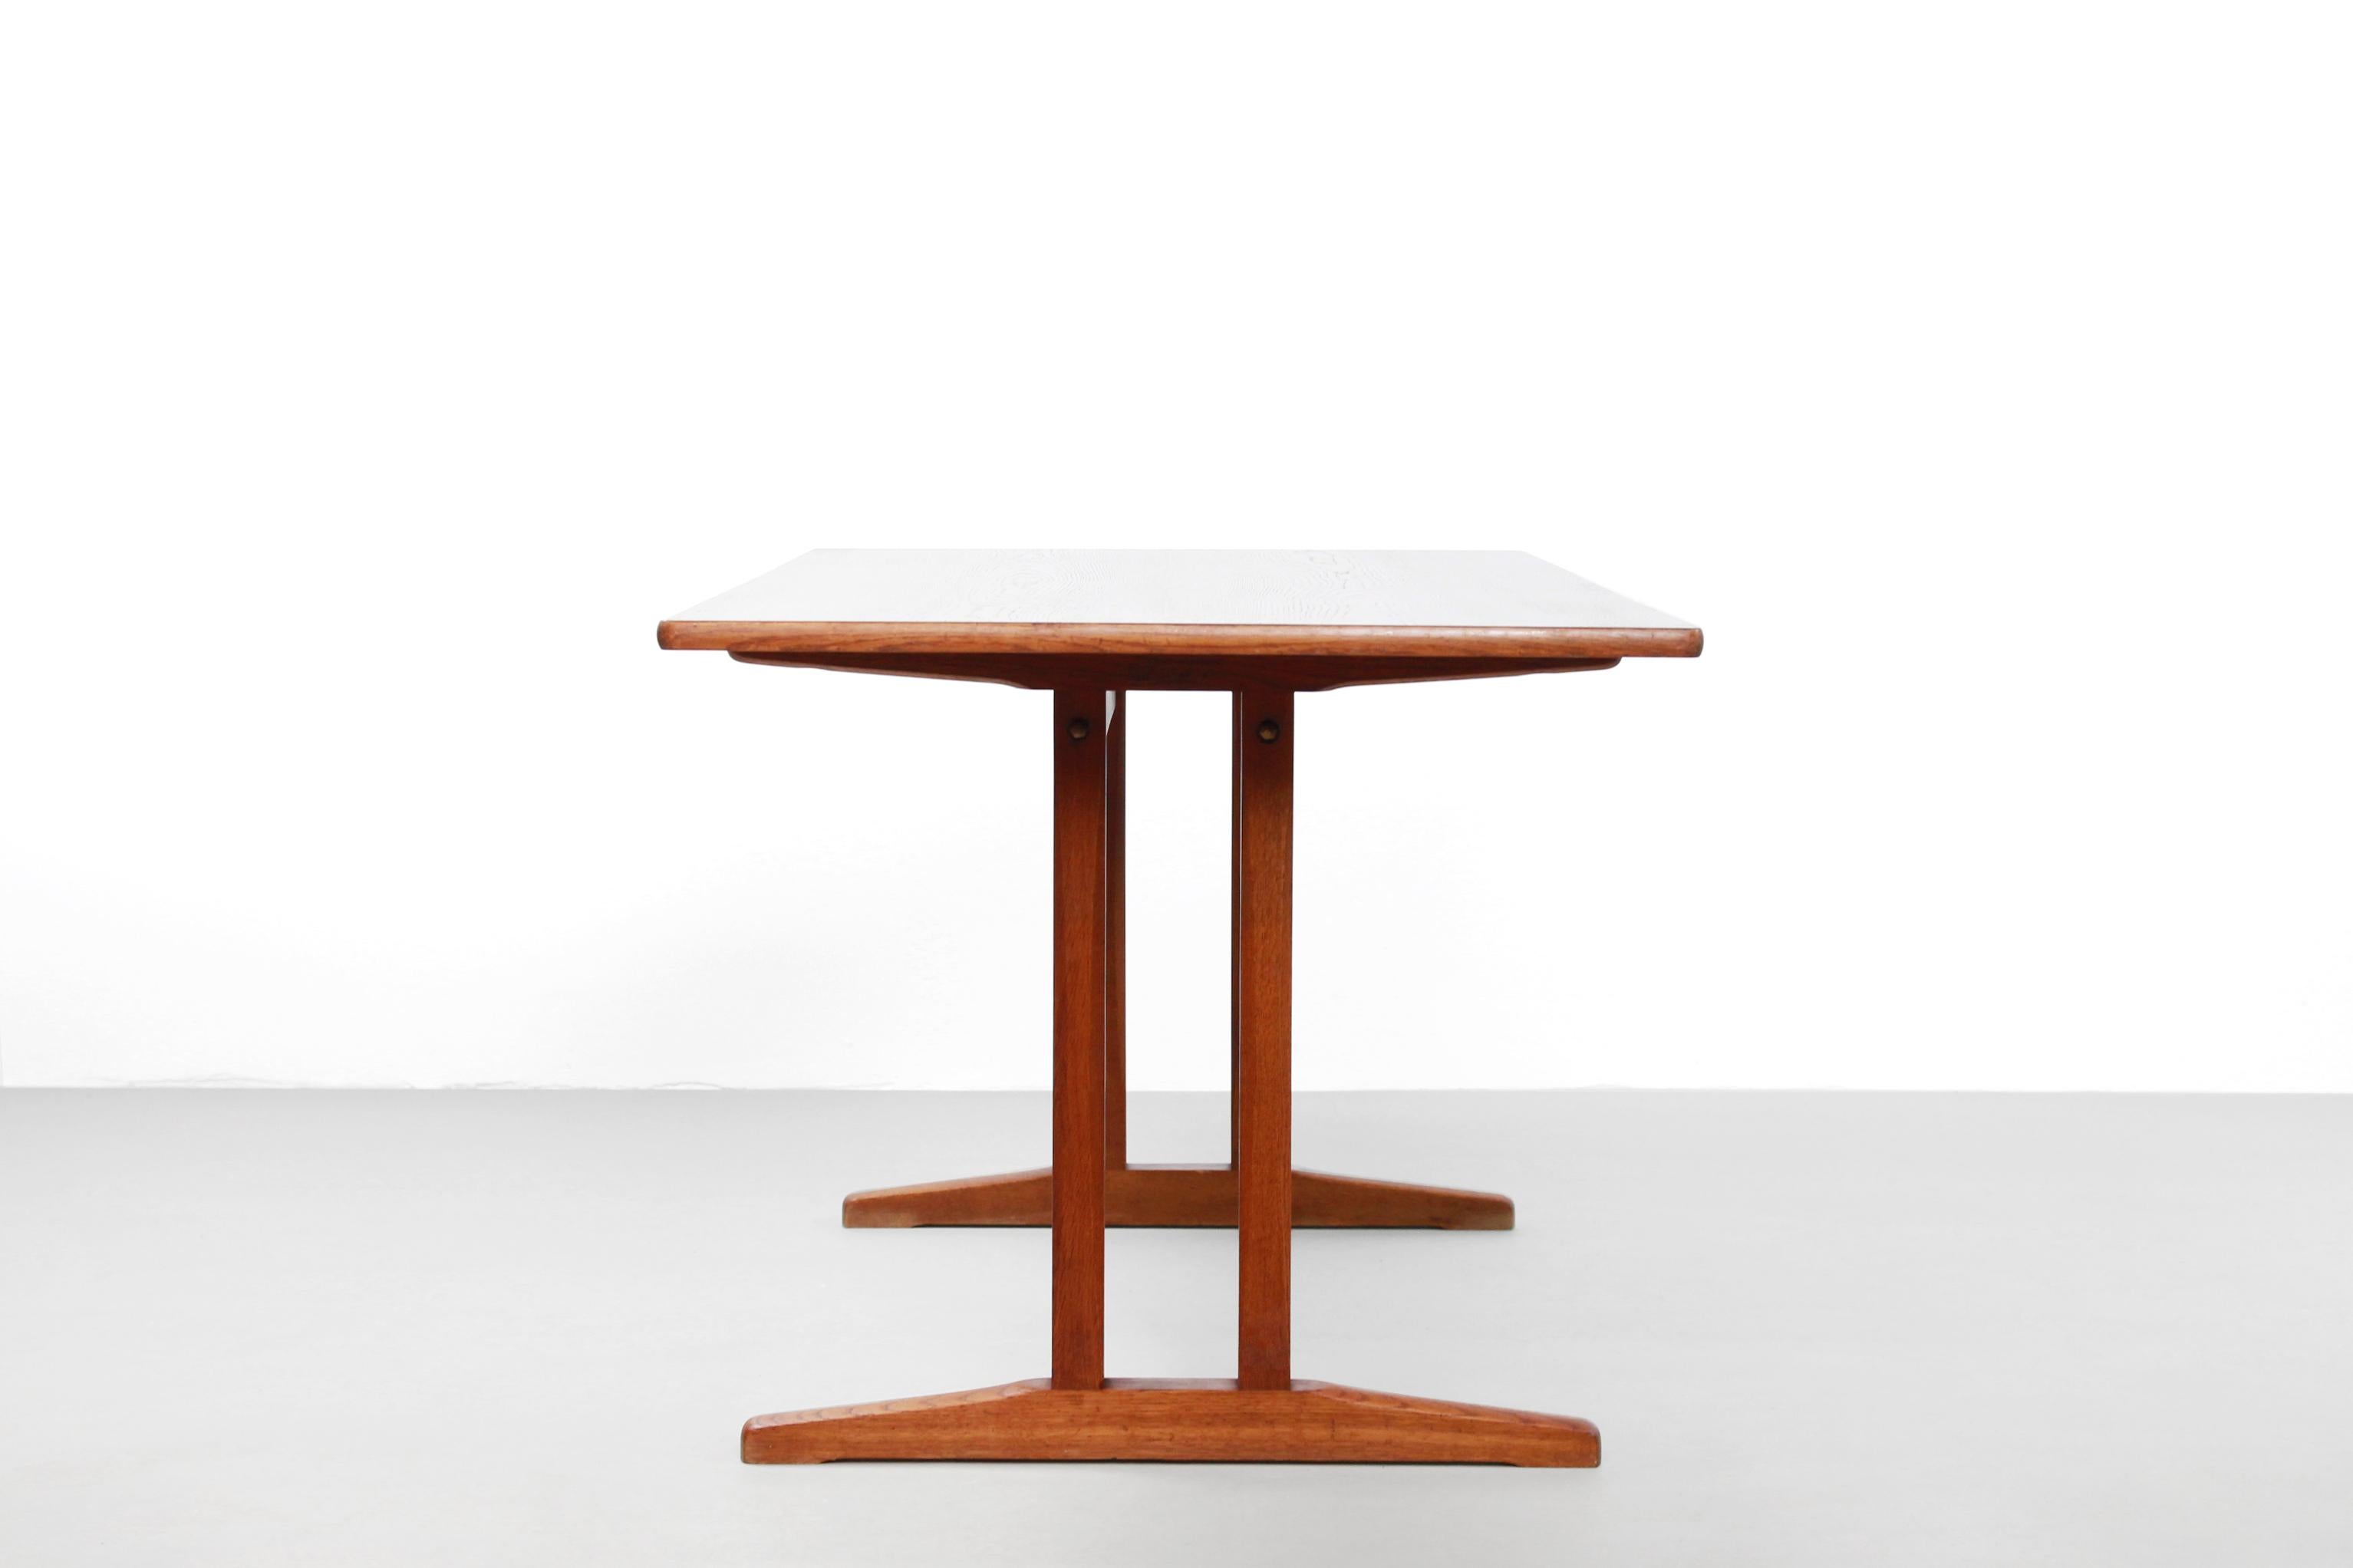 Beautiful oak dining room table designed by Børge Mogensen and produced by FDB Mobler on November 4th 1964. The table is made of oak and has become darker in color over time. Almost like teak. The table is 160 cm long, 82 cm deep and 73 cm high.